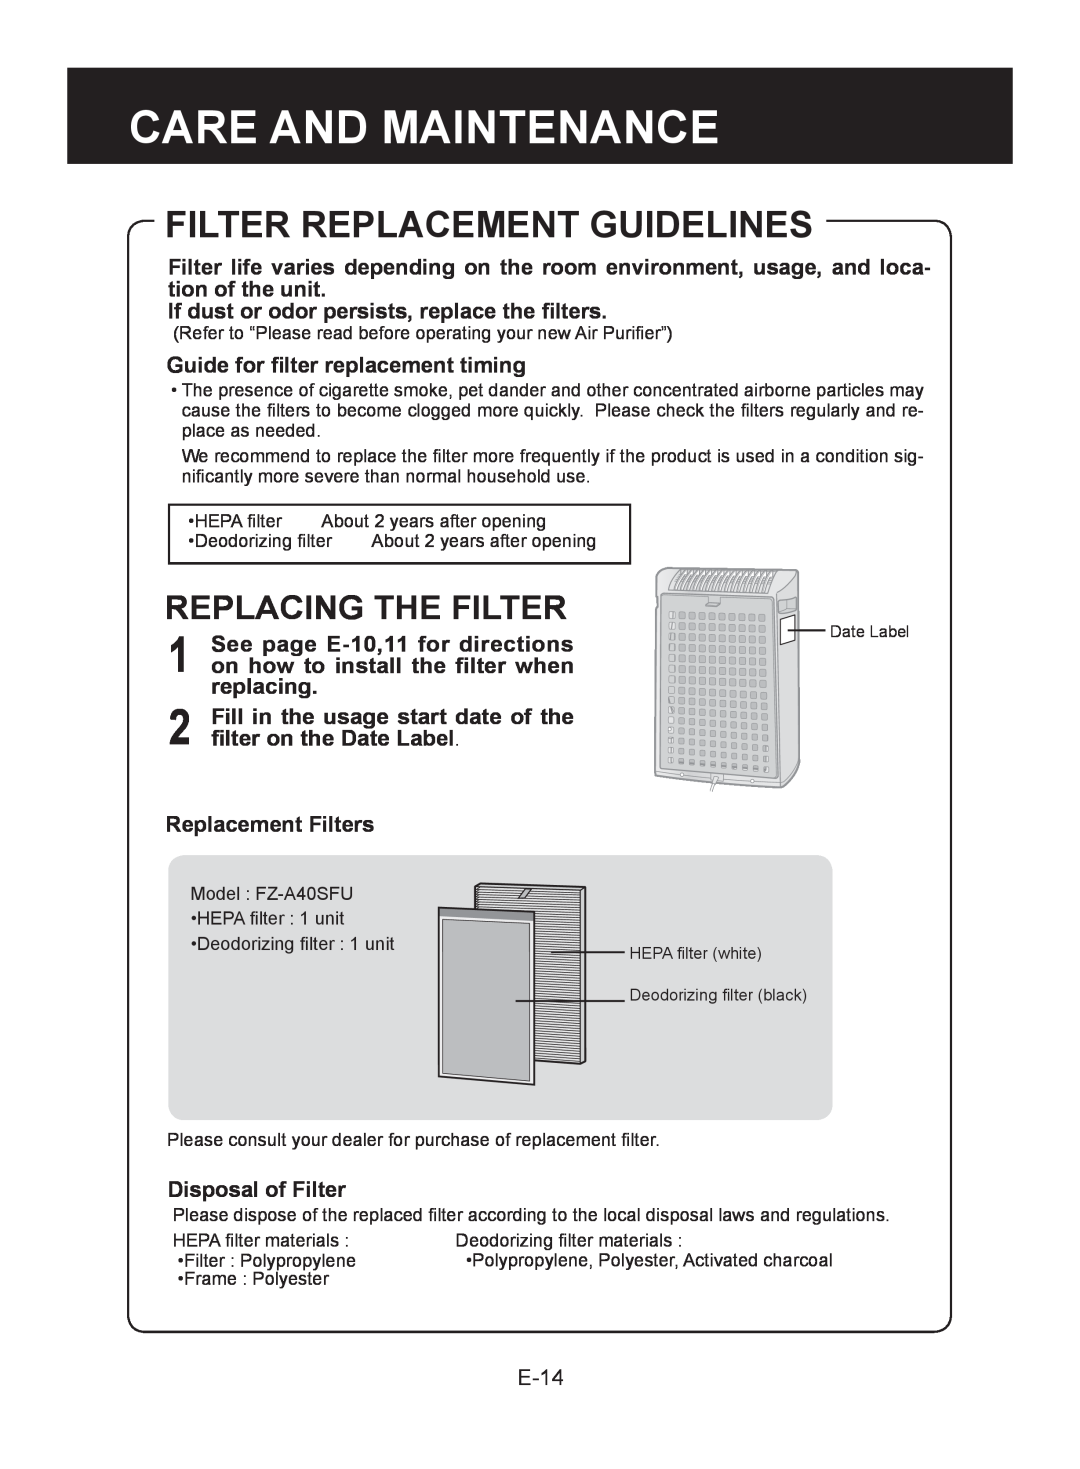 Sharp FP-A40C, FP-A40UW operation manual Filter Replacement Guidelines, Replacing The Filter, Care And Maintenance 